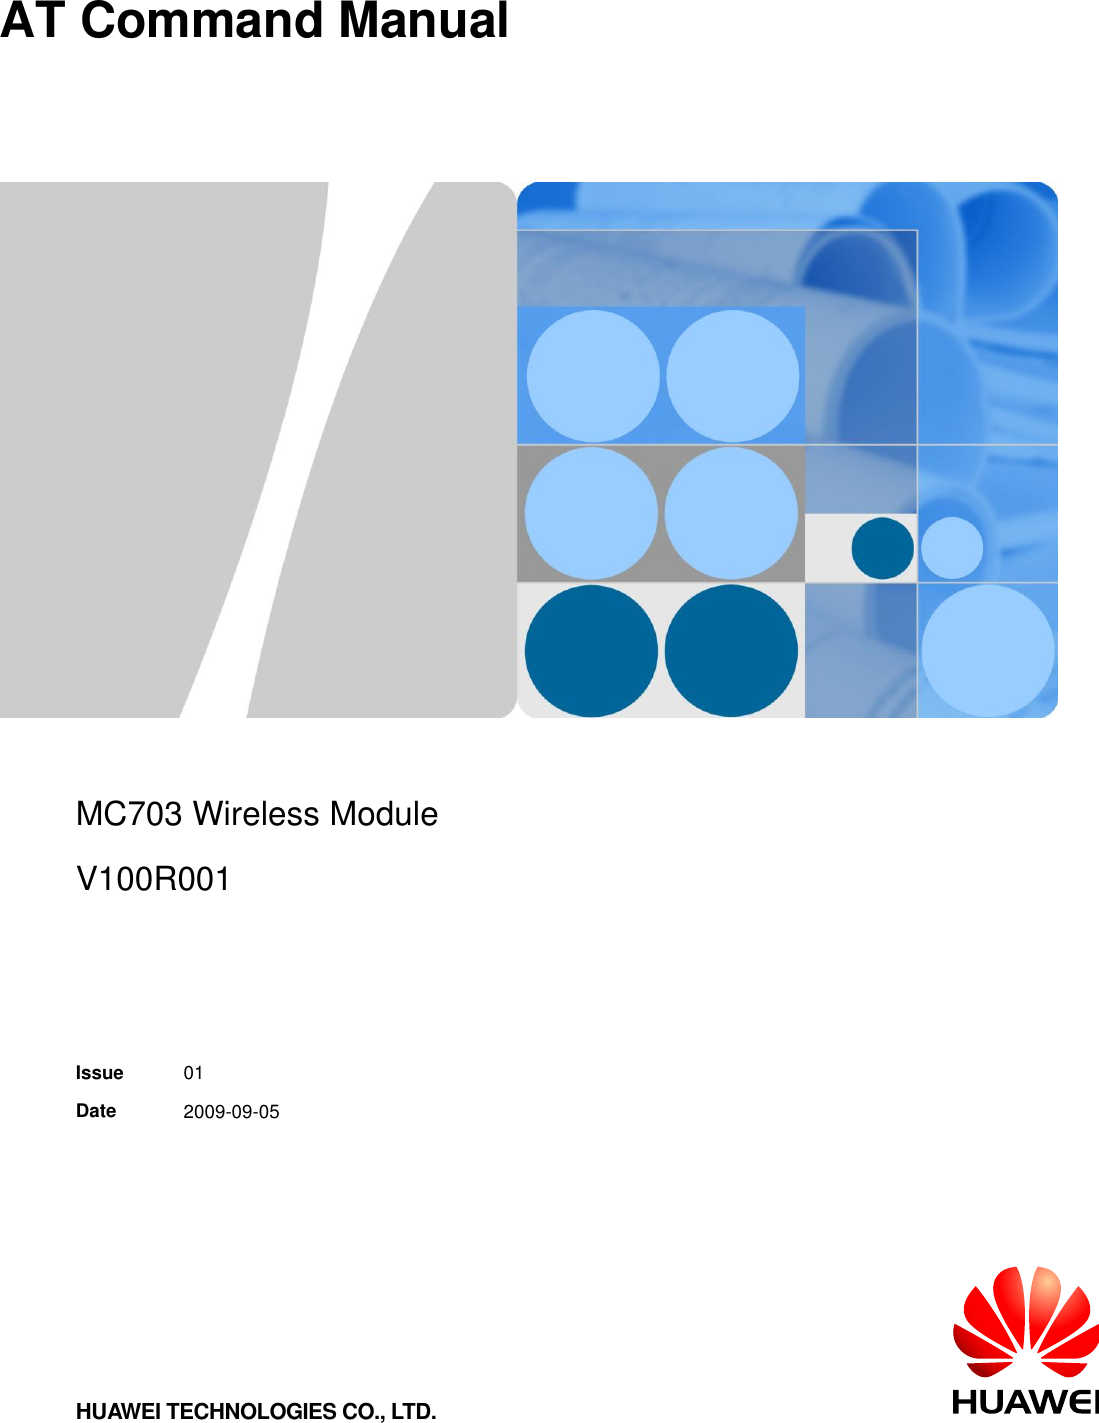   AT Command Manual    MC703 Wireless Module V100R001   Issue 01 Date 2009-09-05  HUAWEI TECHNOLOGIES CO., LTD.  